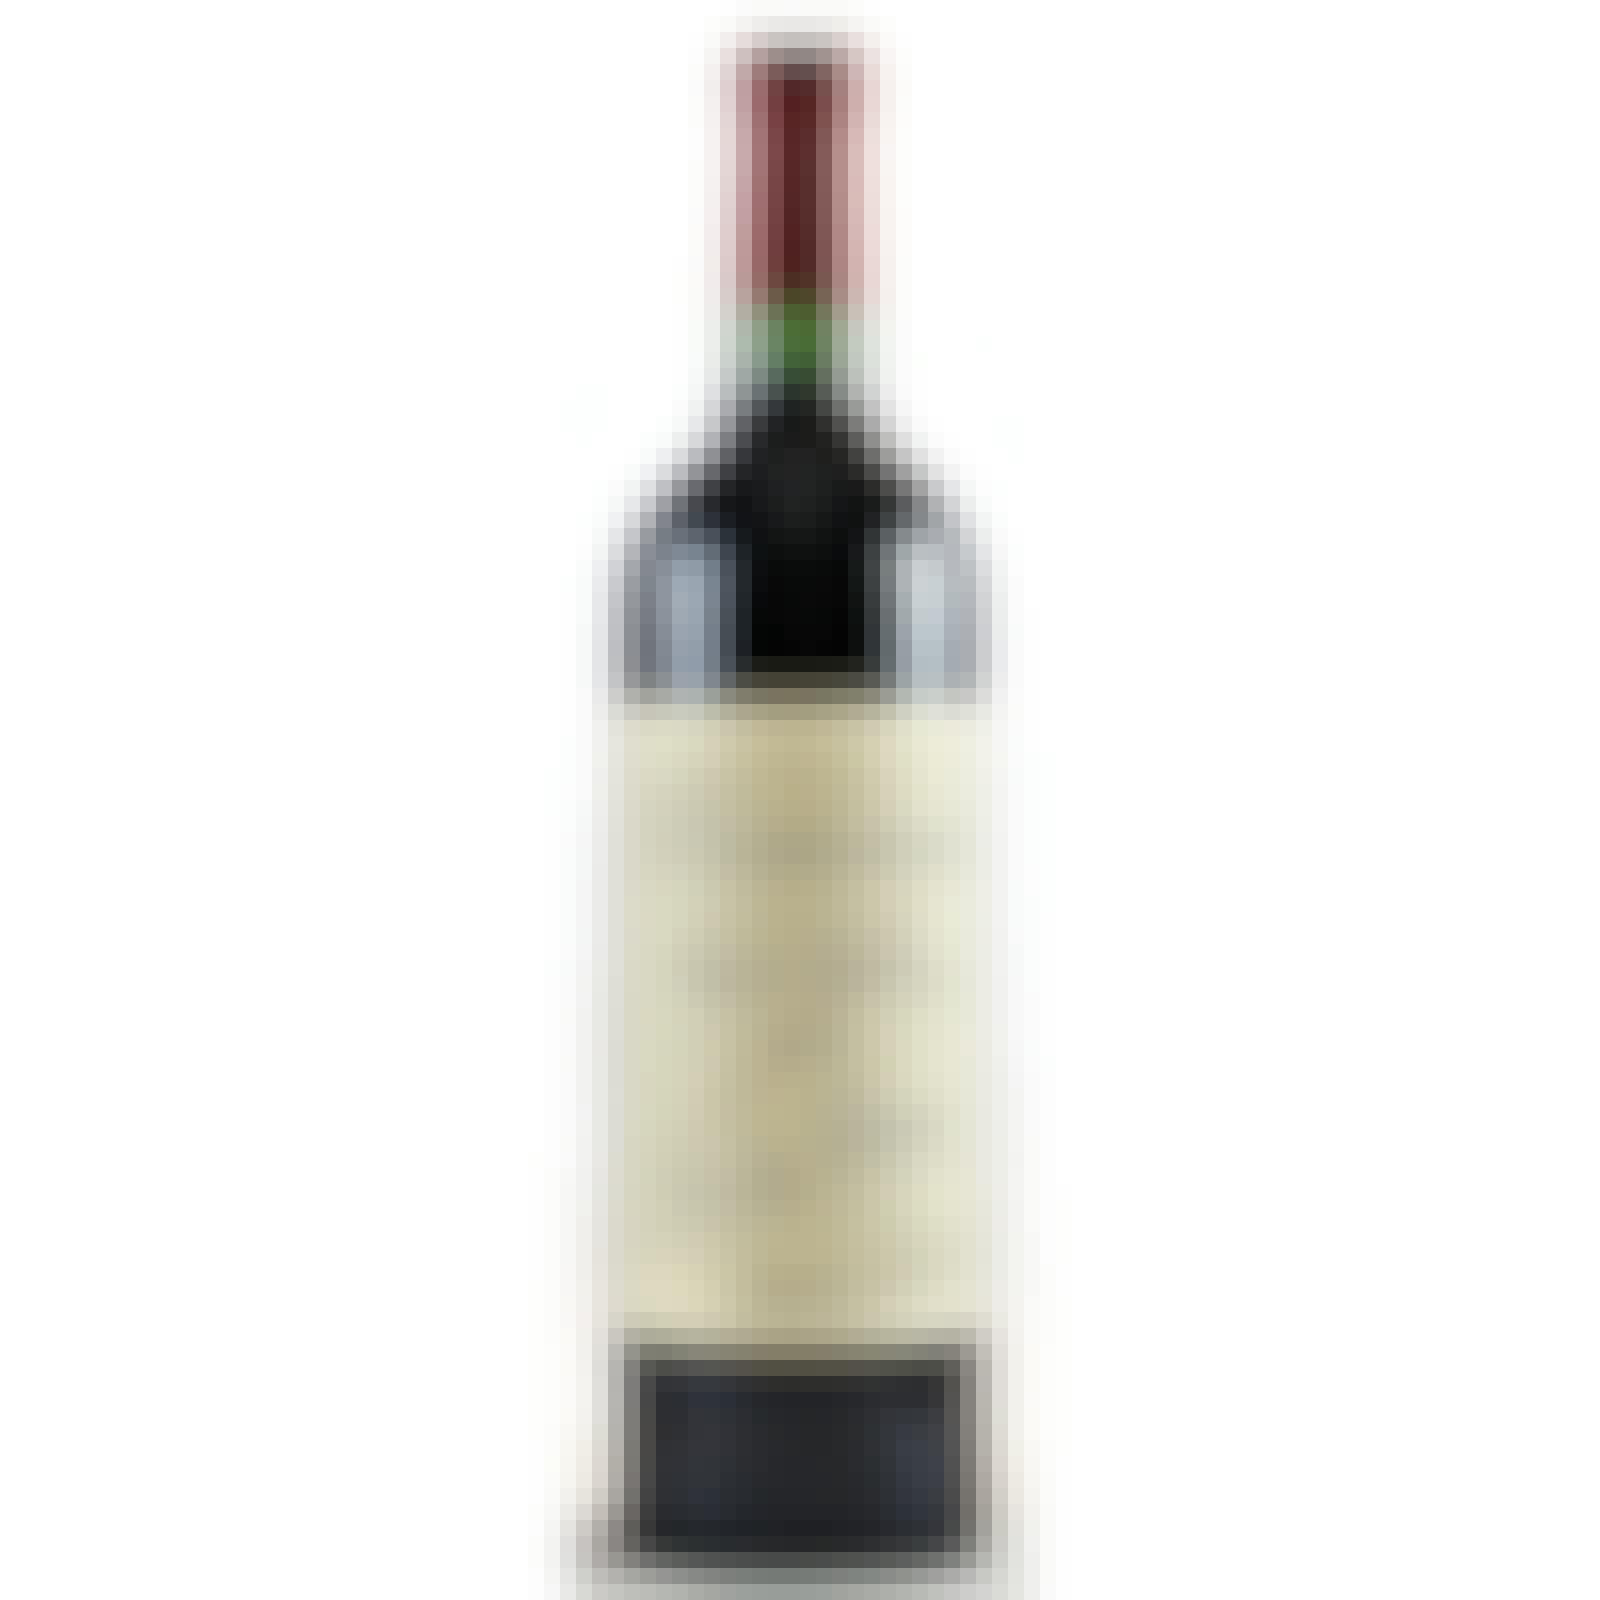 Dominus Napa Valley Red 2004 750ml